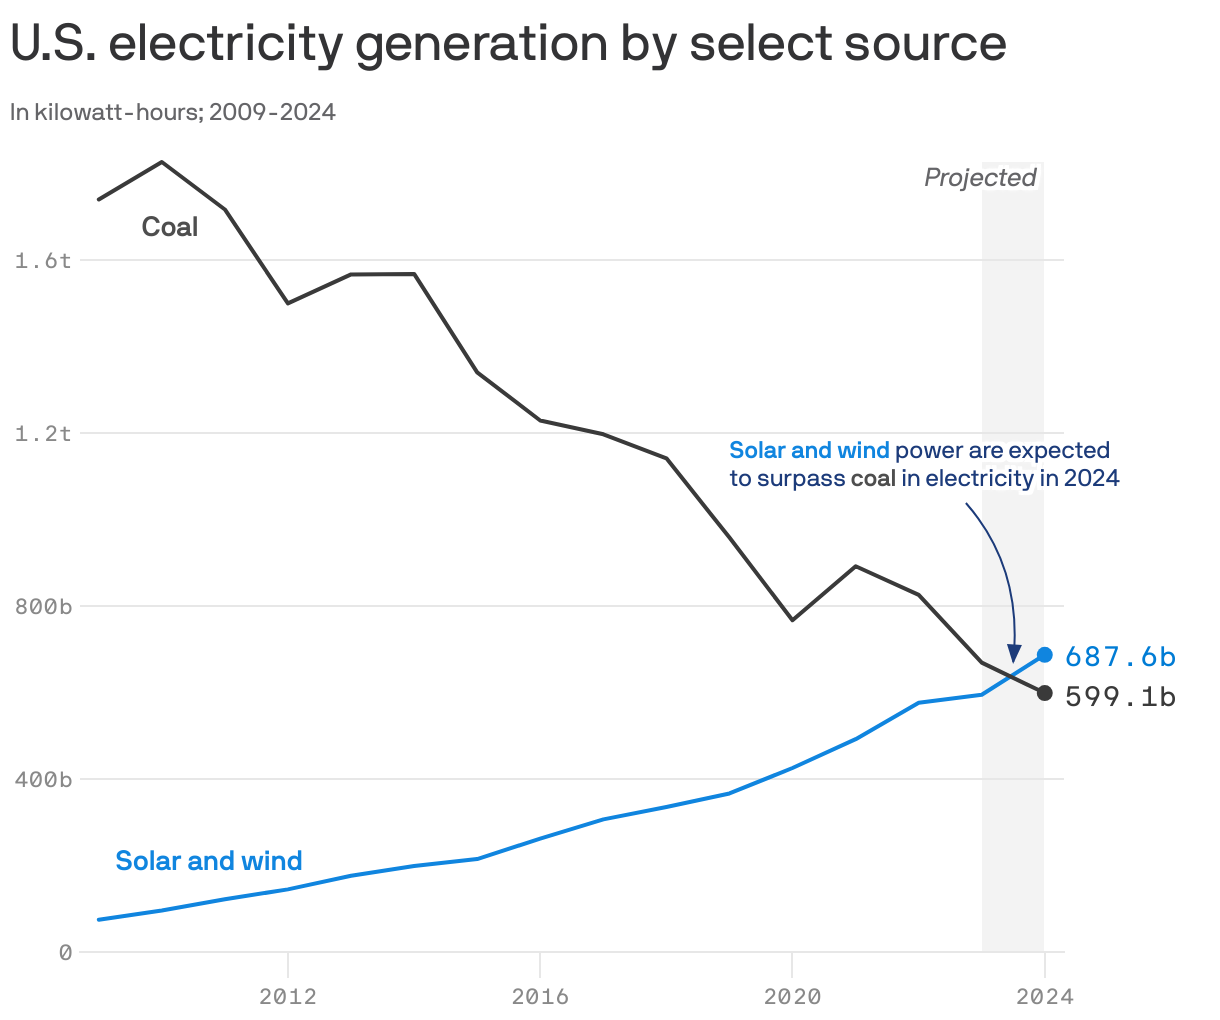 U.S. electricity generation by select source